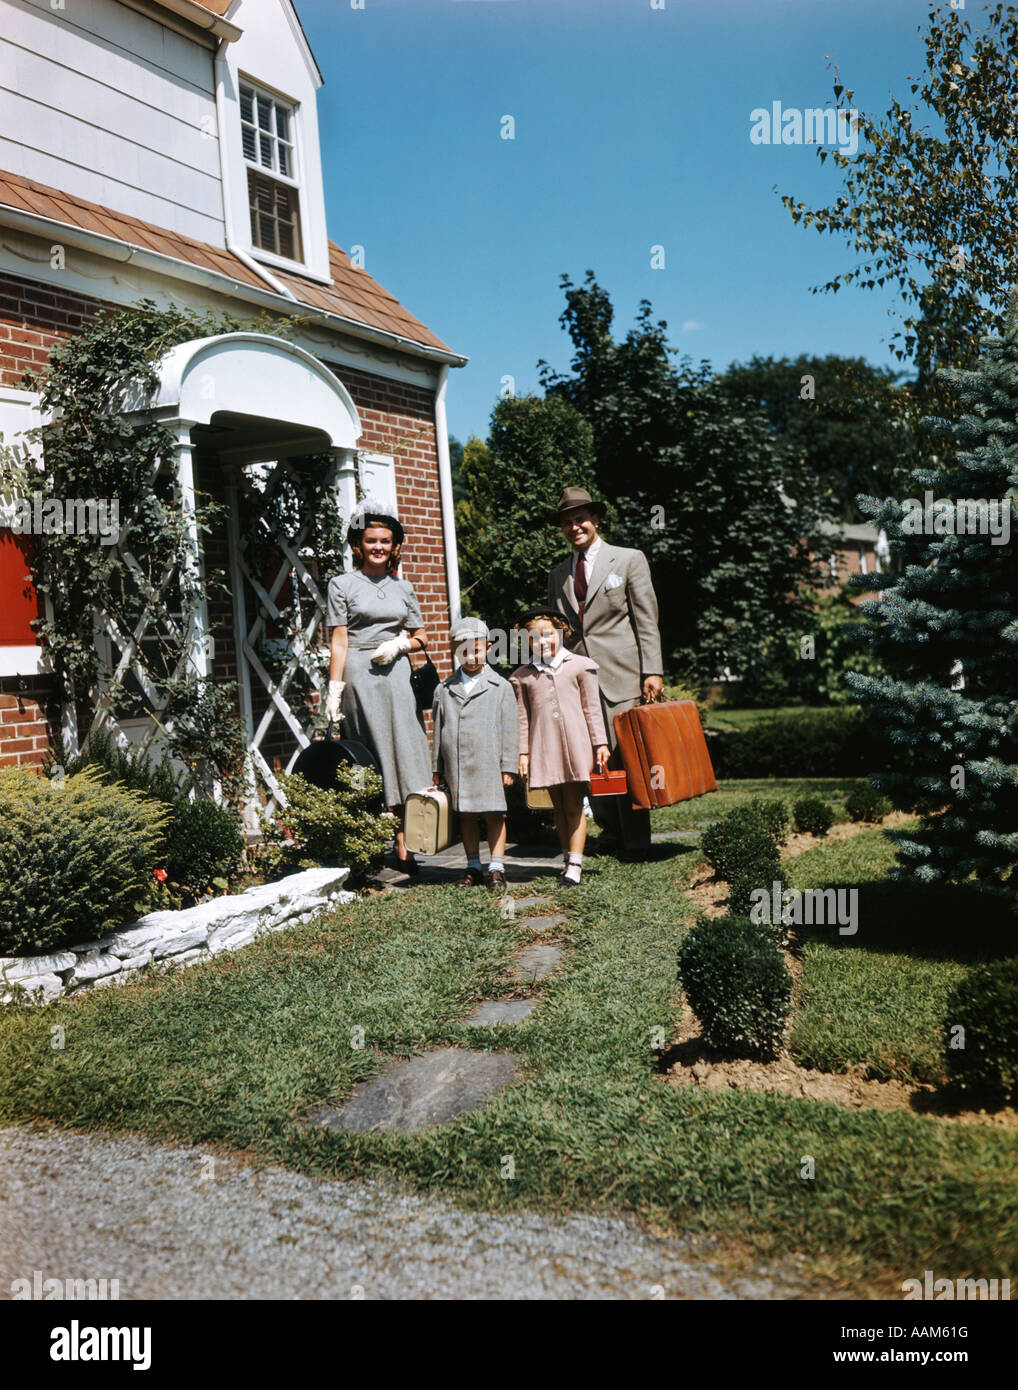 FAMILY WITH LUGGAGE IN FRONT OF HOME Stock Photo